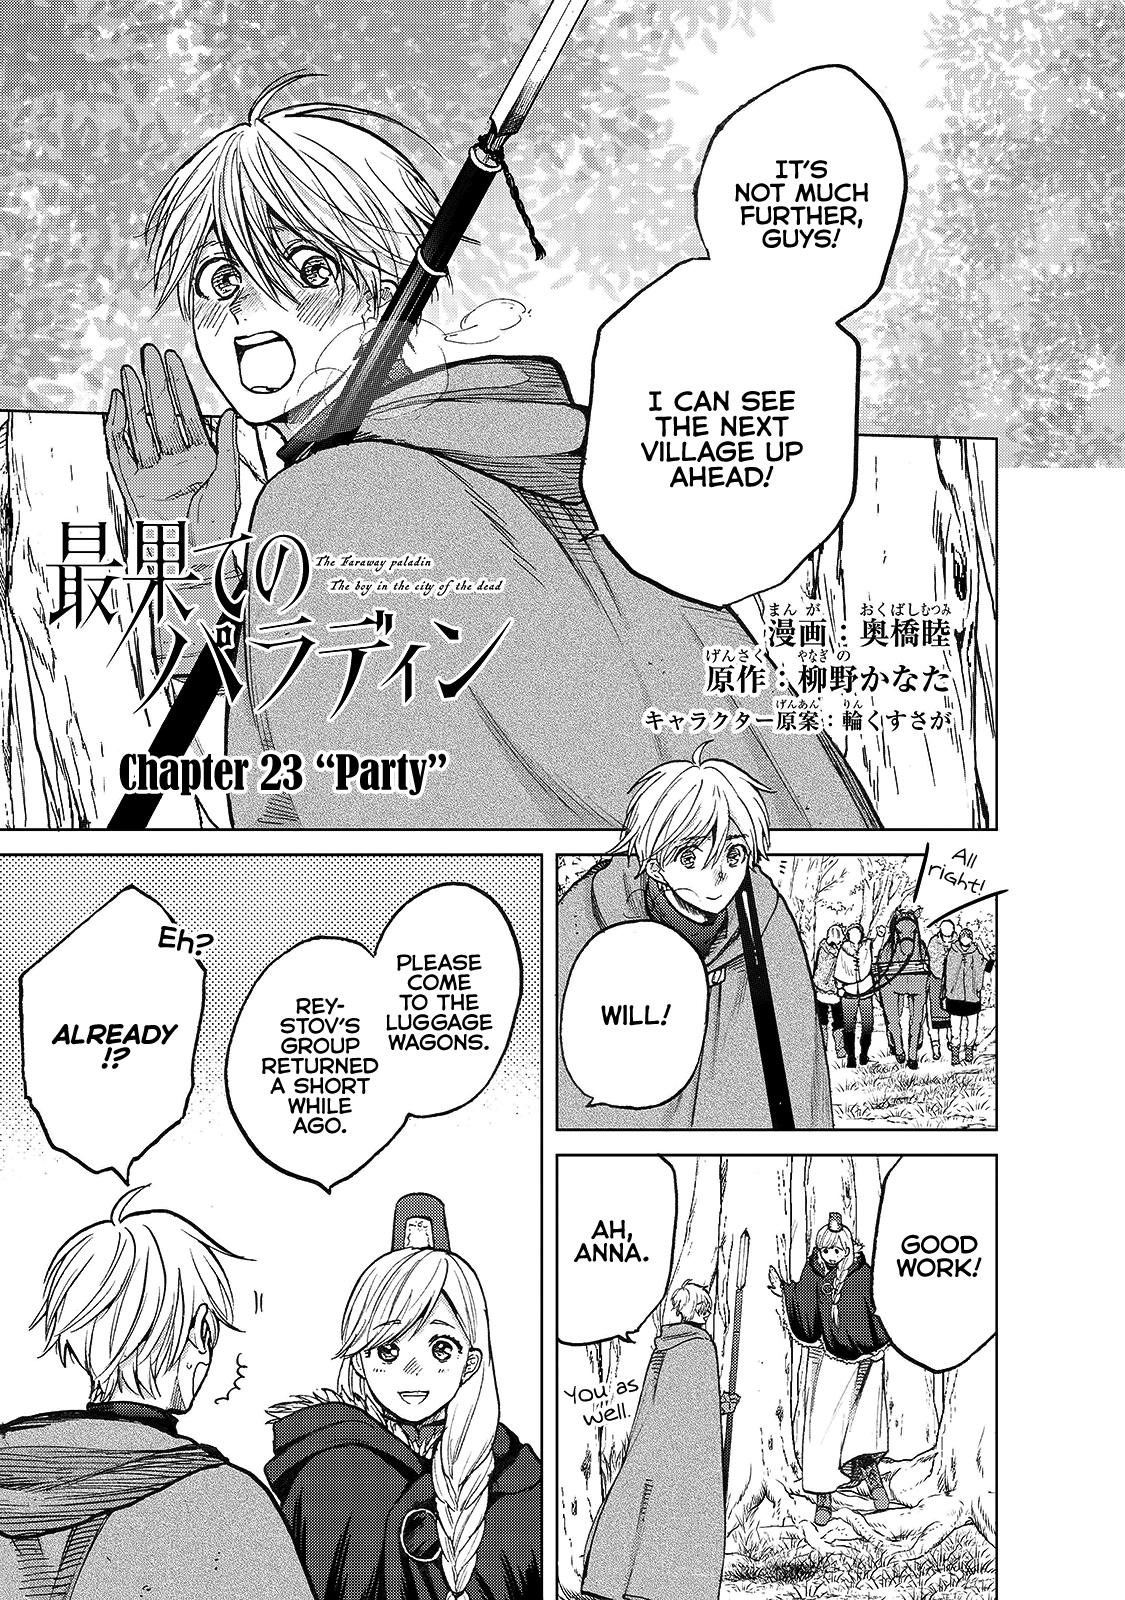 Latest chapter of the manga the faraway paladin has some major